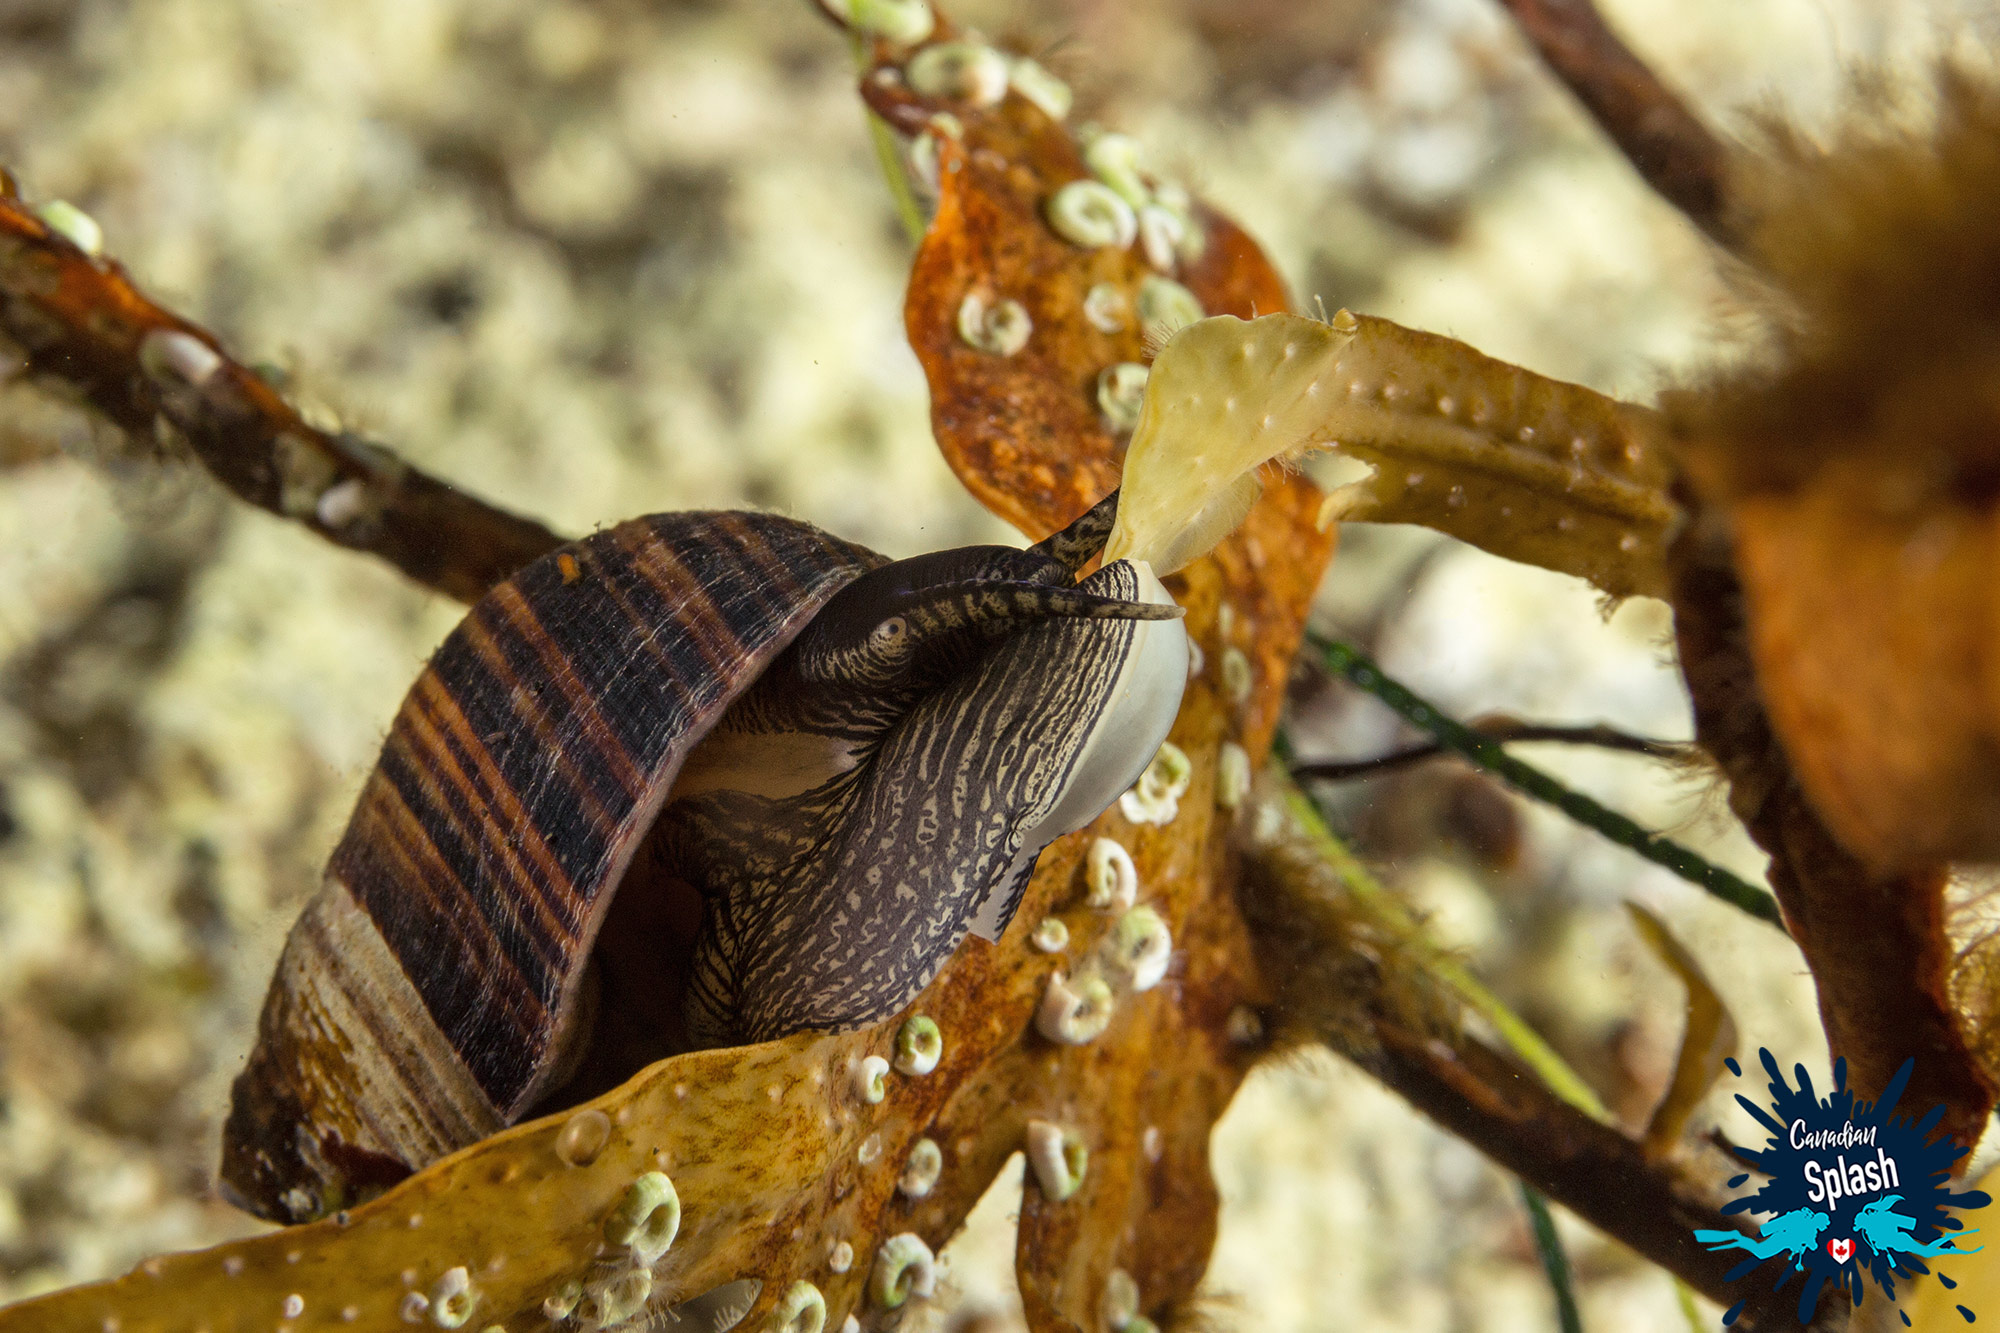 A Periwinkle Snail On A Piece On Rockweed In Nova Scotia, Canada